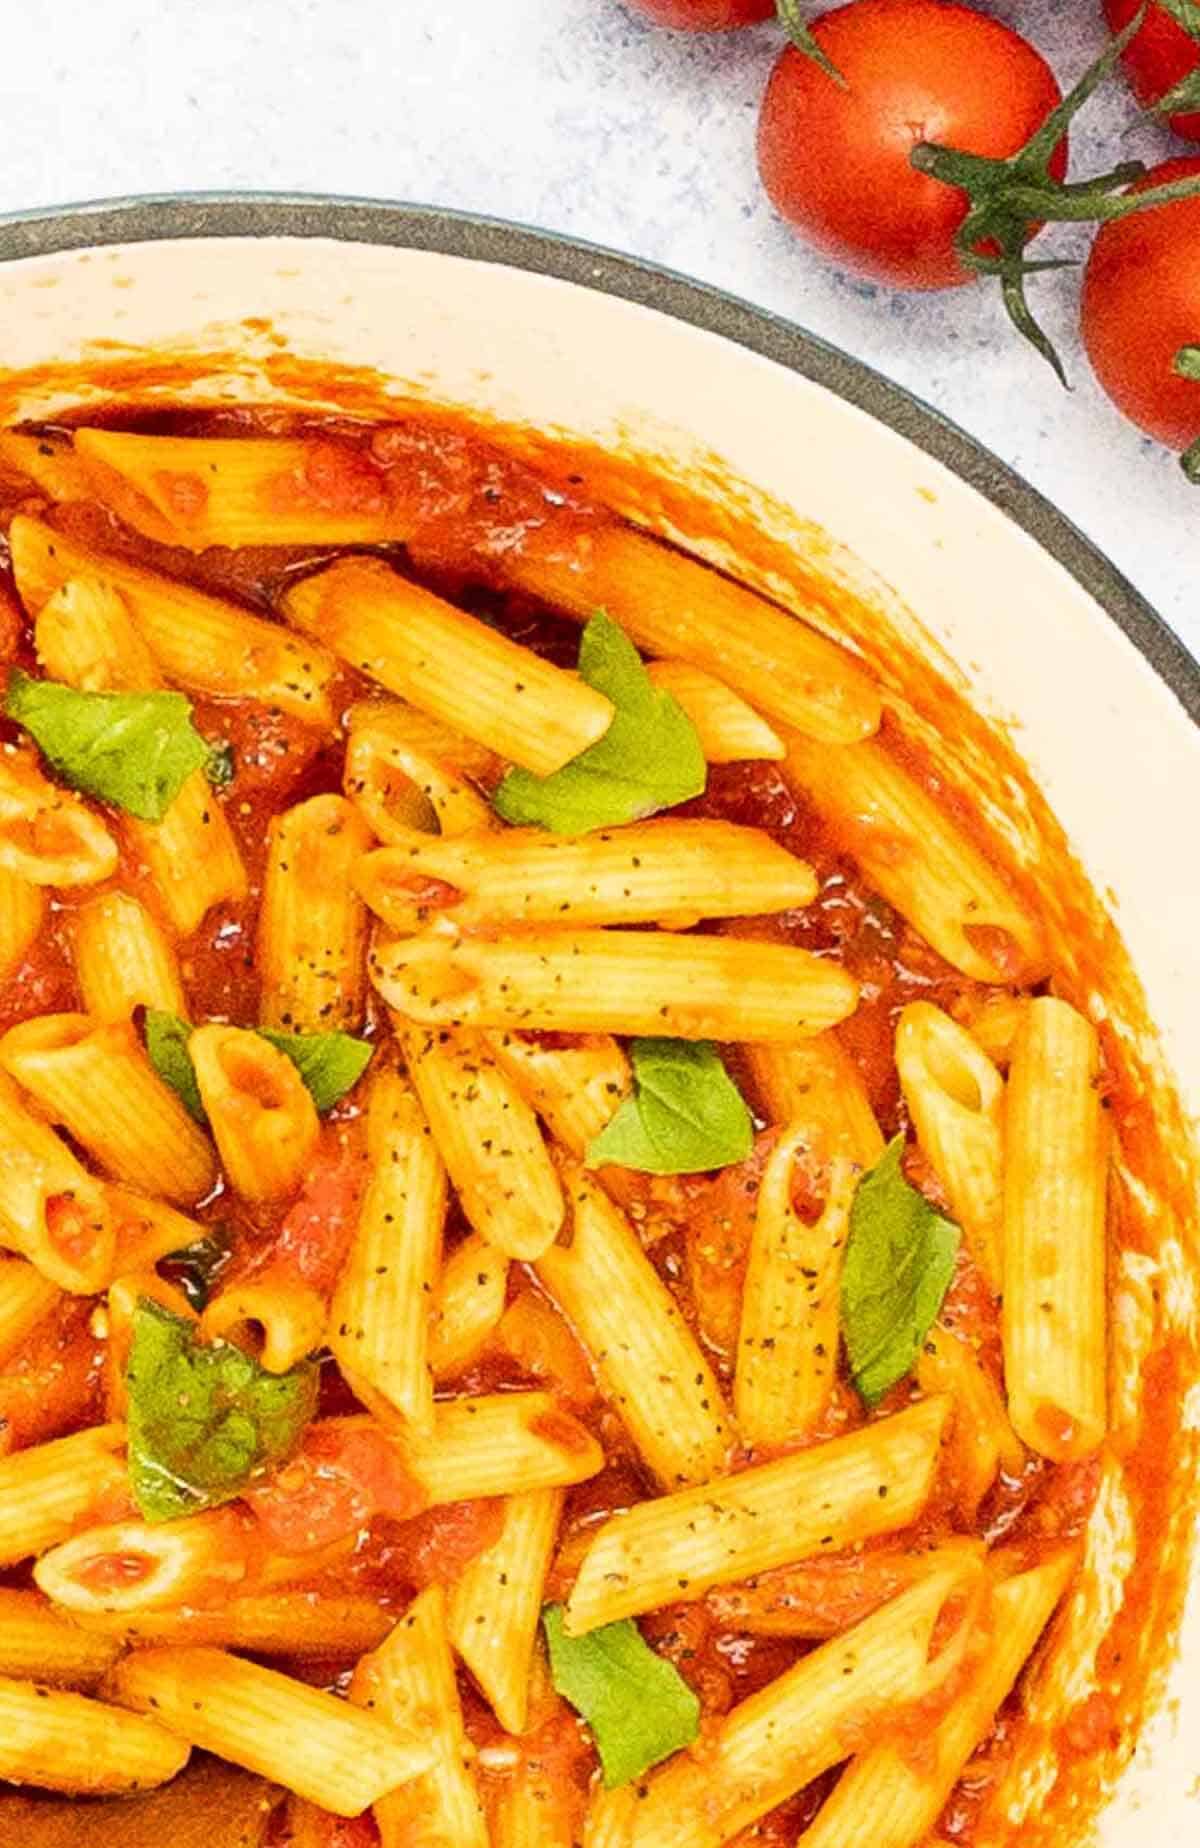 Penne arrabiata in a pot and ready to eat.